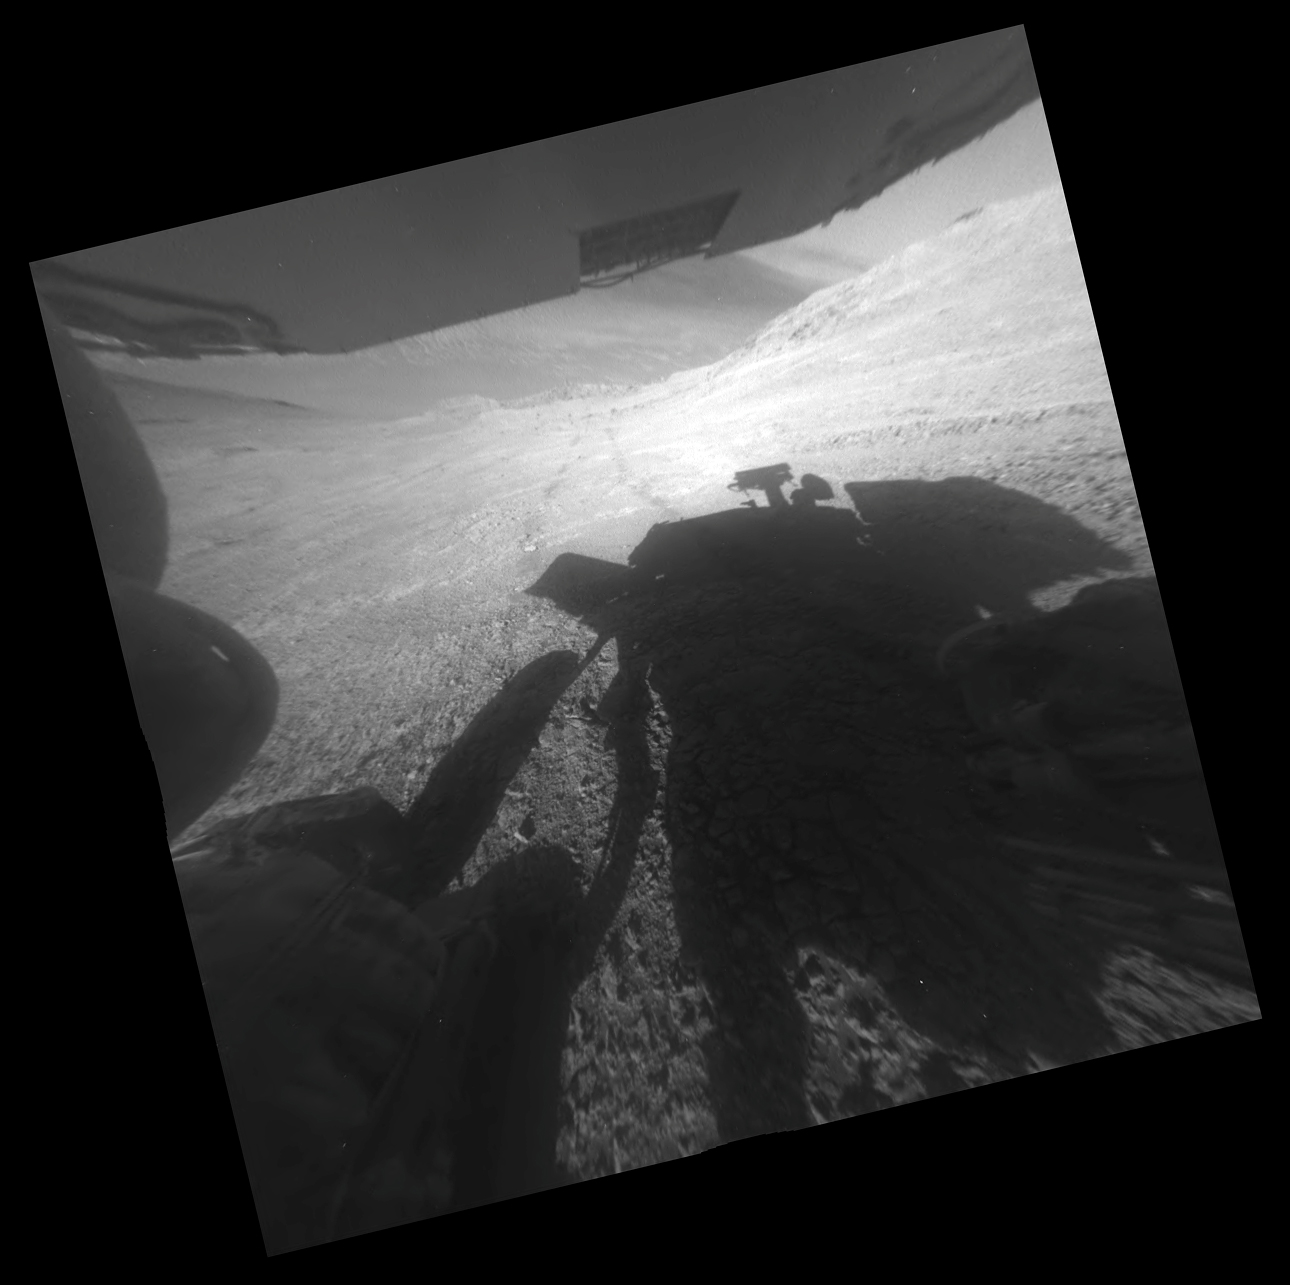 Opportunity's Shadow and Tracks on Martian Slope